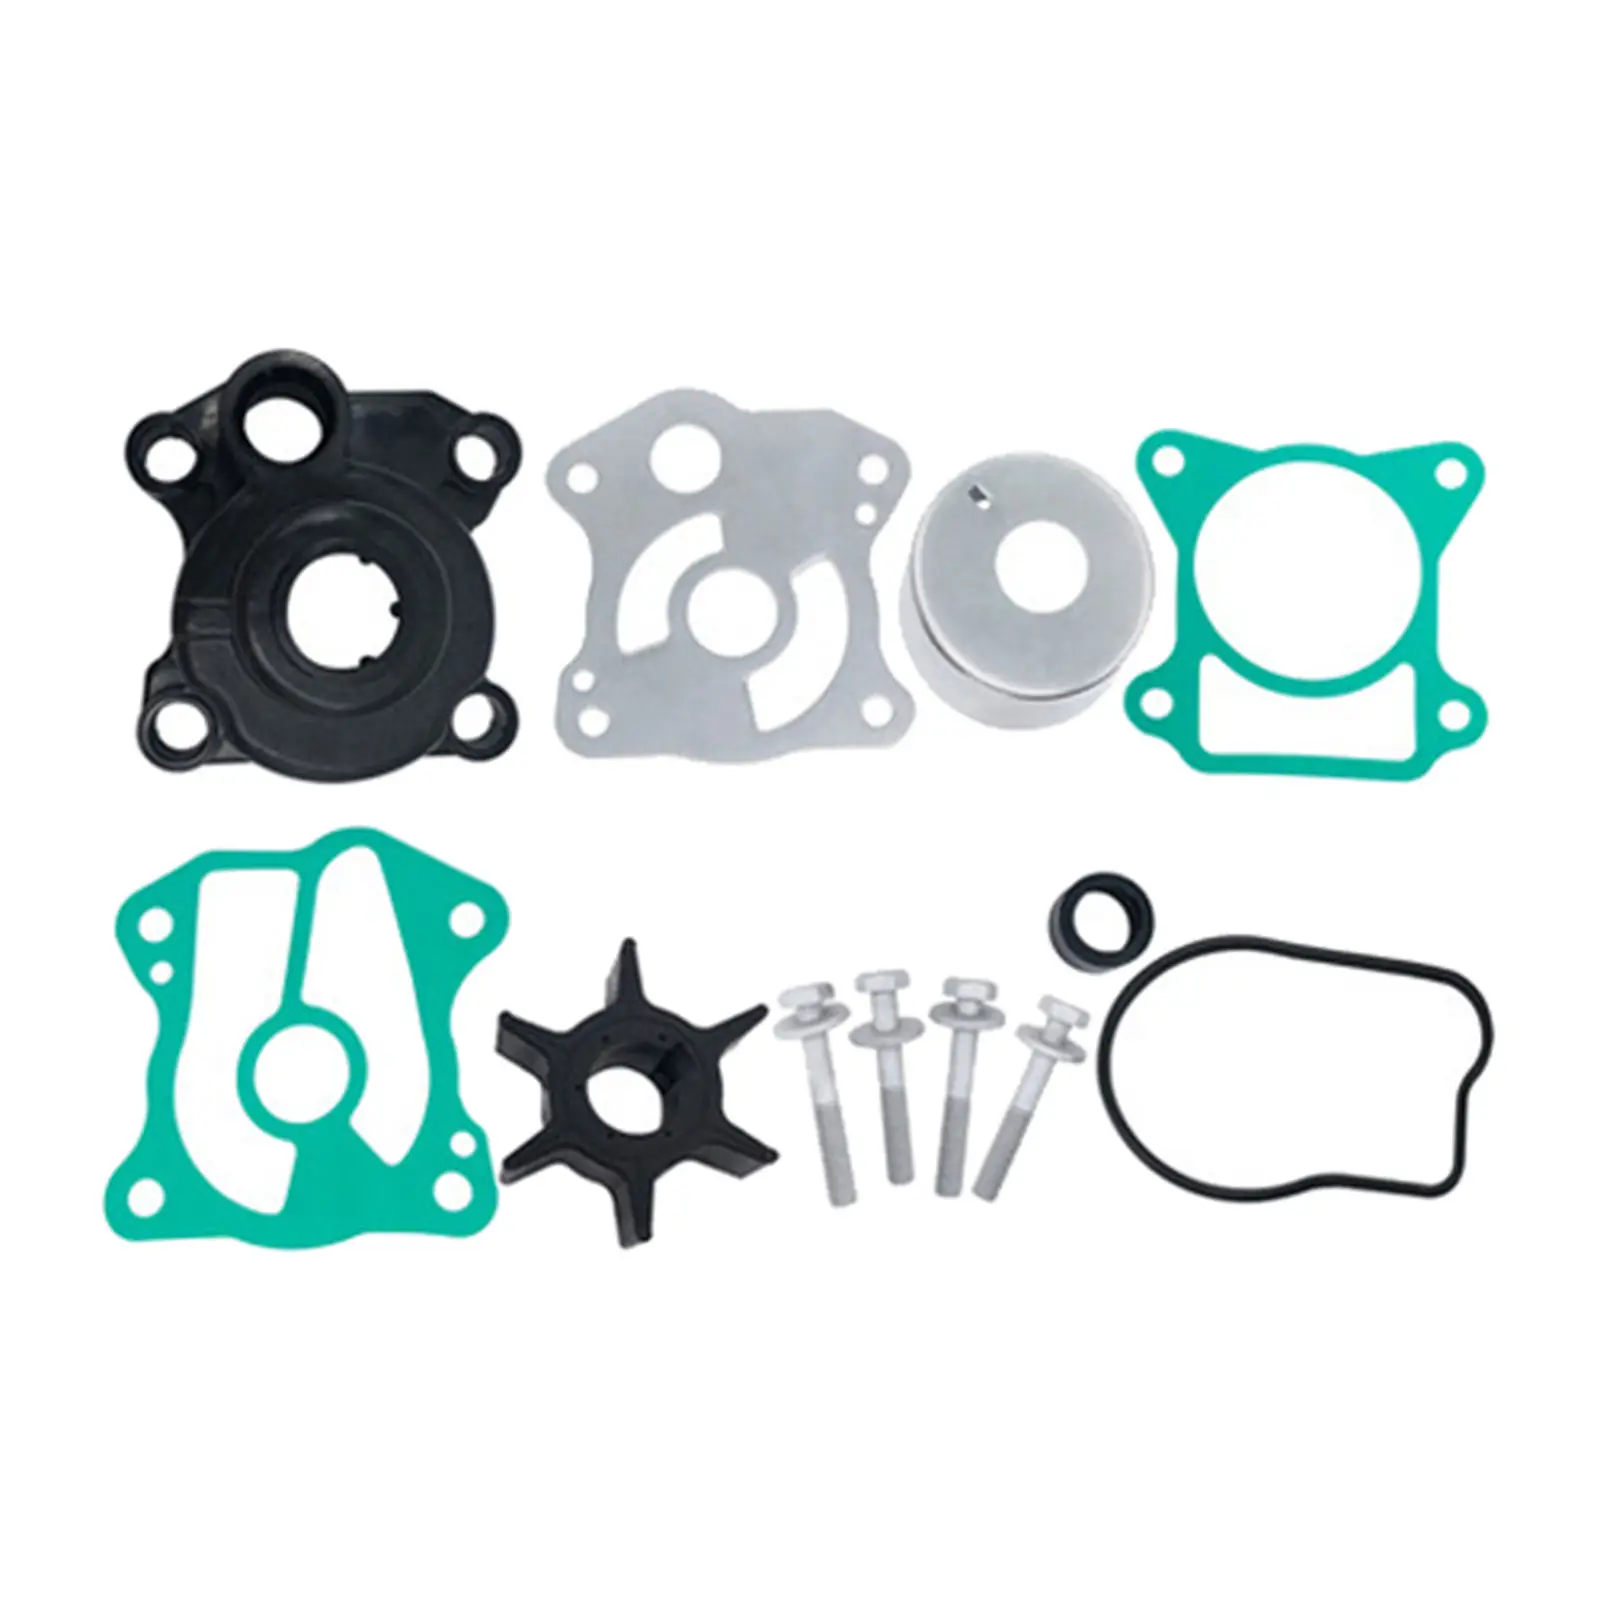 Water Pump Impeller Kit for Honda BF30A BF30D 06193-ZV7-020 06193-ZV7-010 Outboard Engines Replace